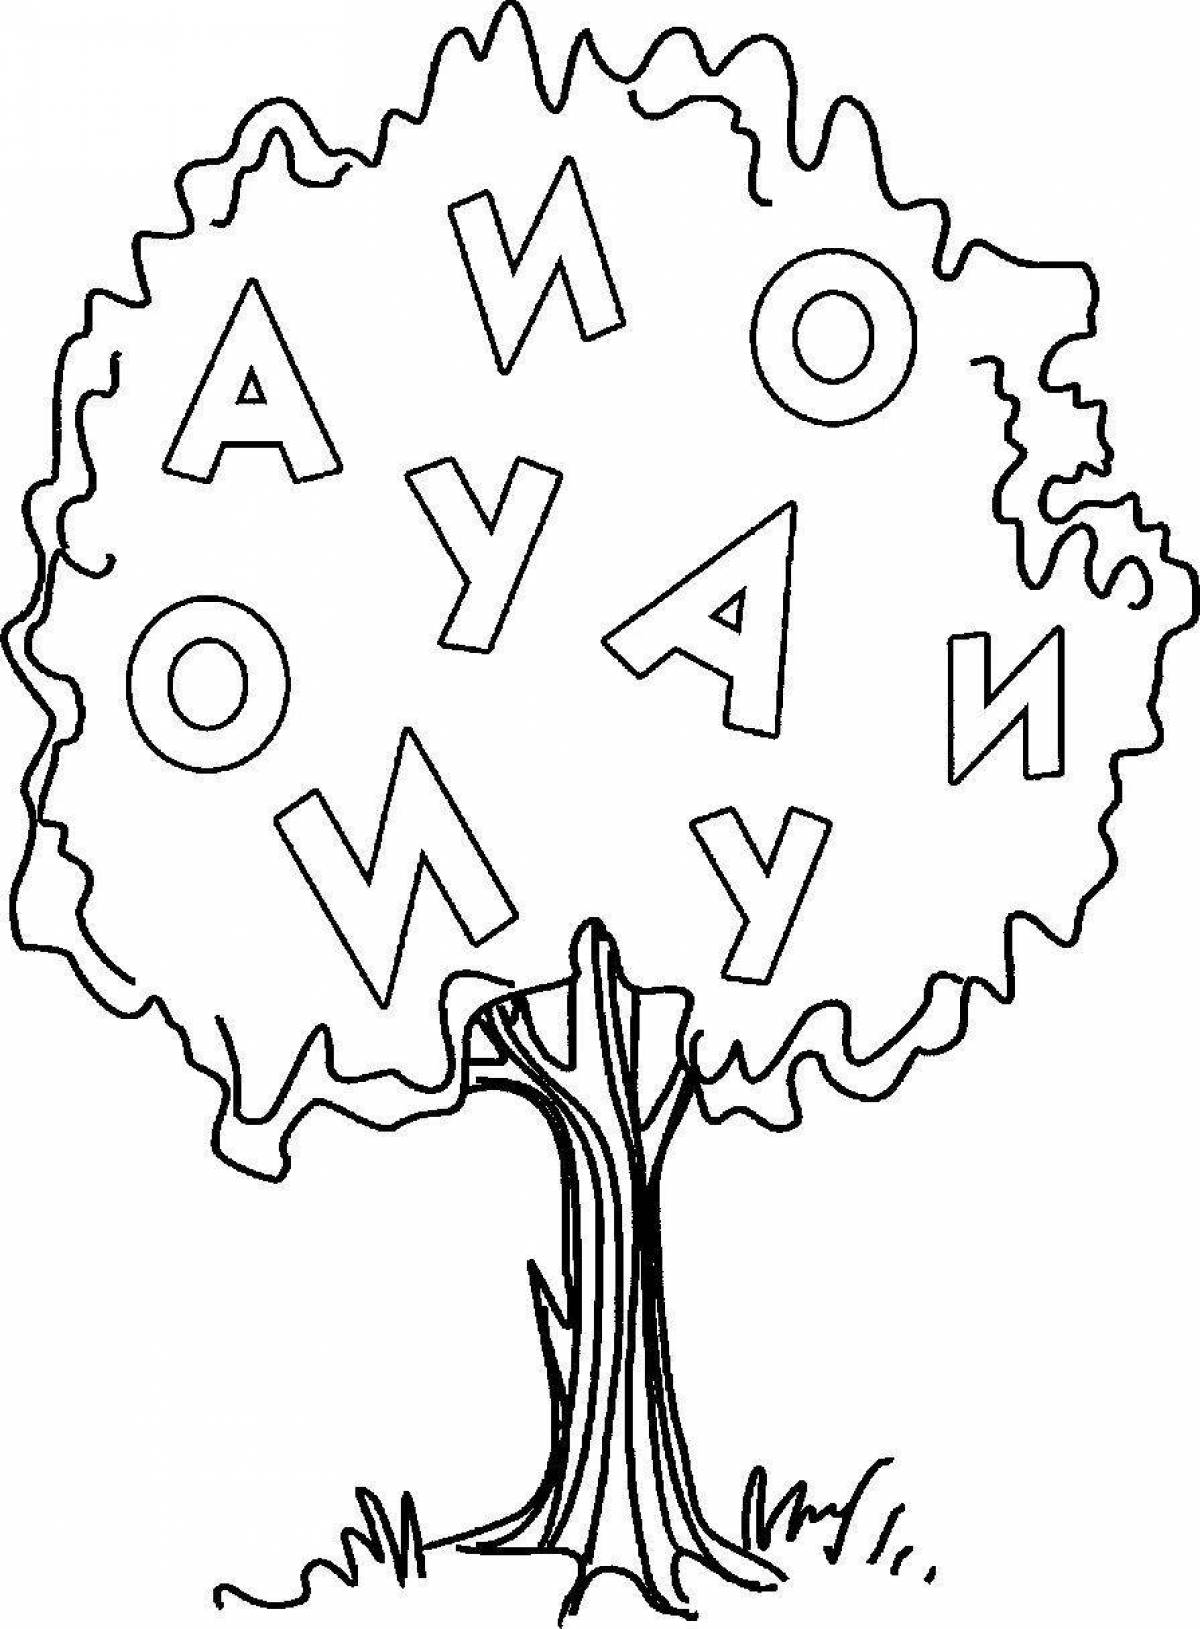 Coloring of vowel sounds